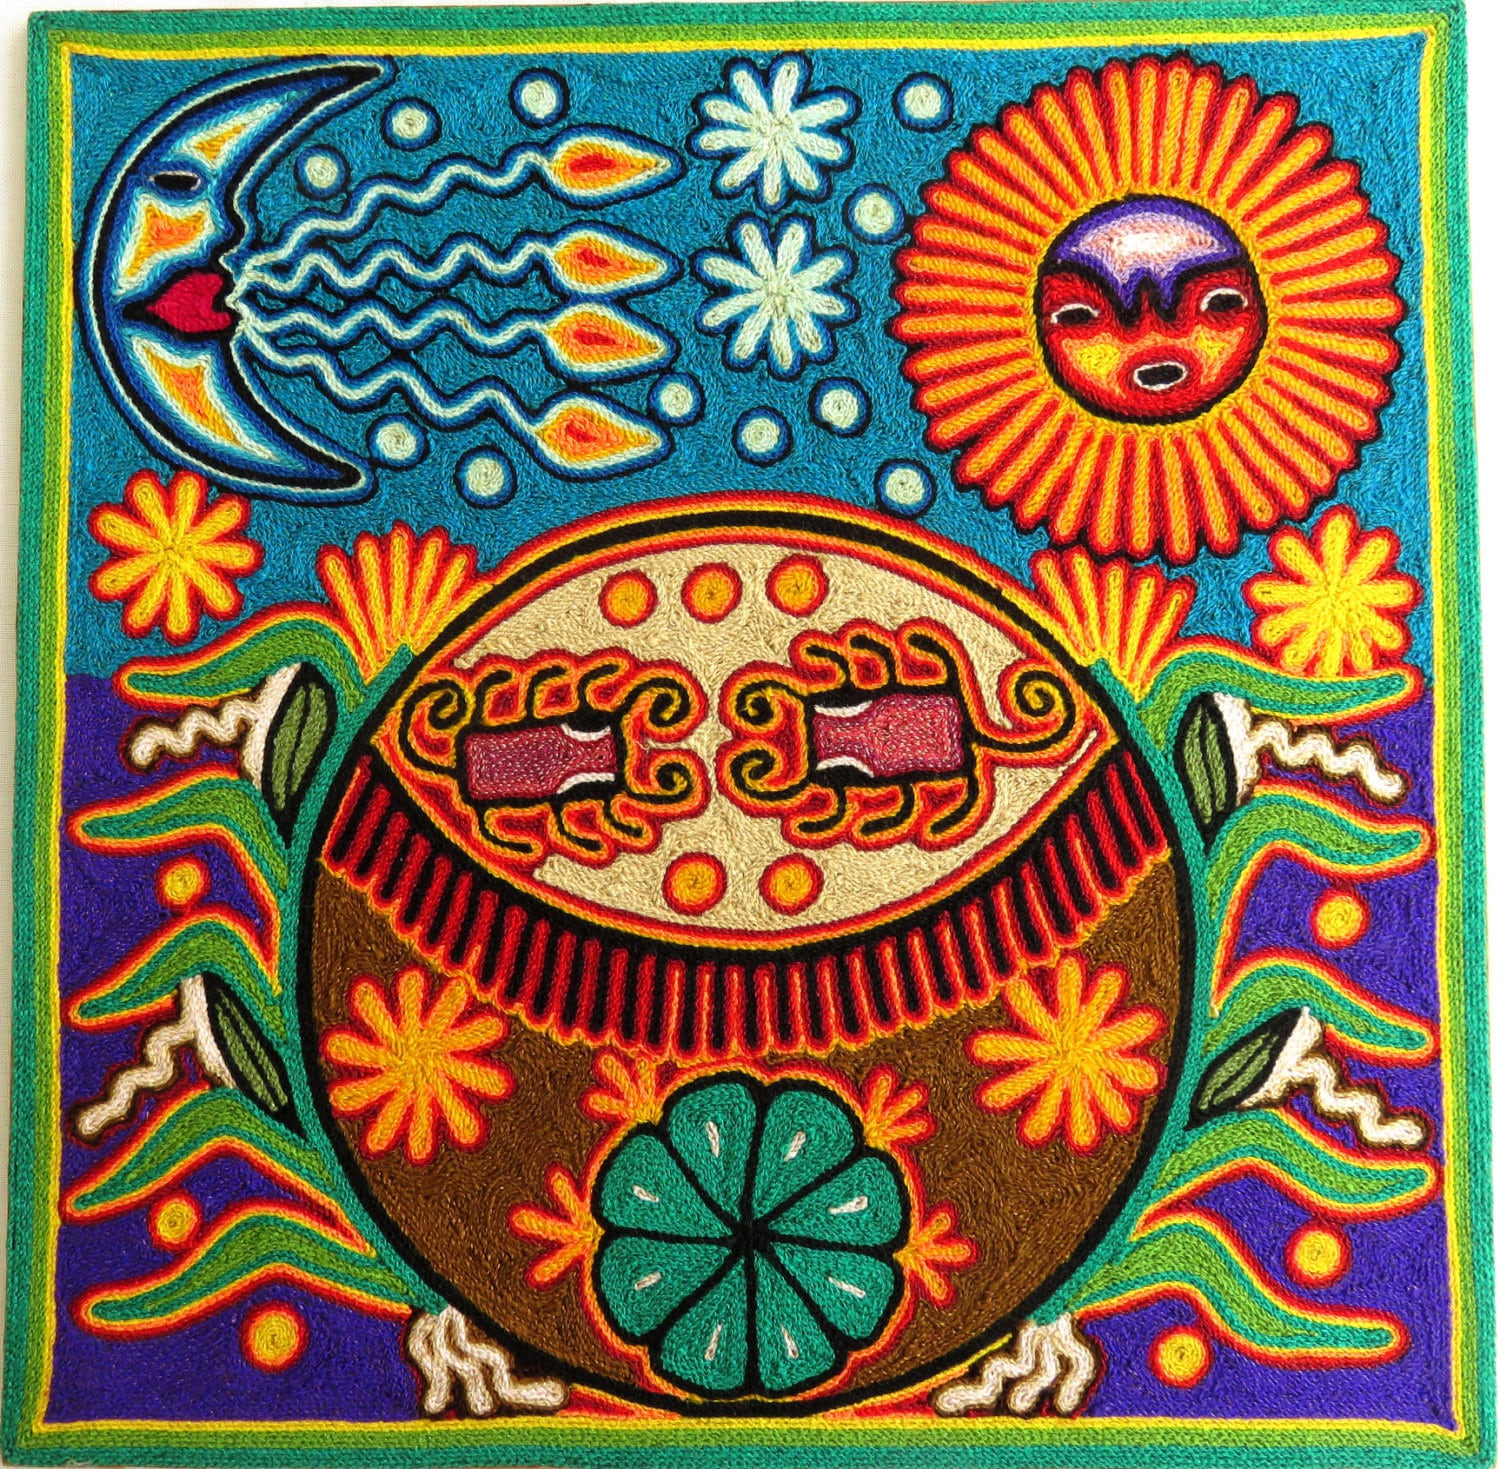 12 Huichol yarn painting 30-005 F Mexican art Mexican